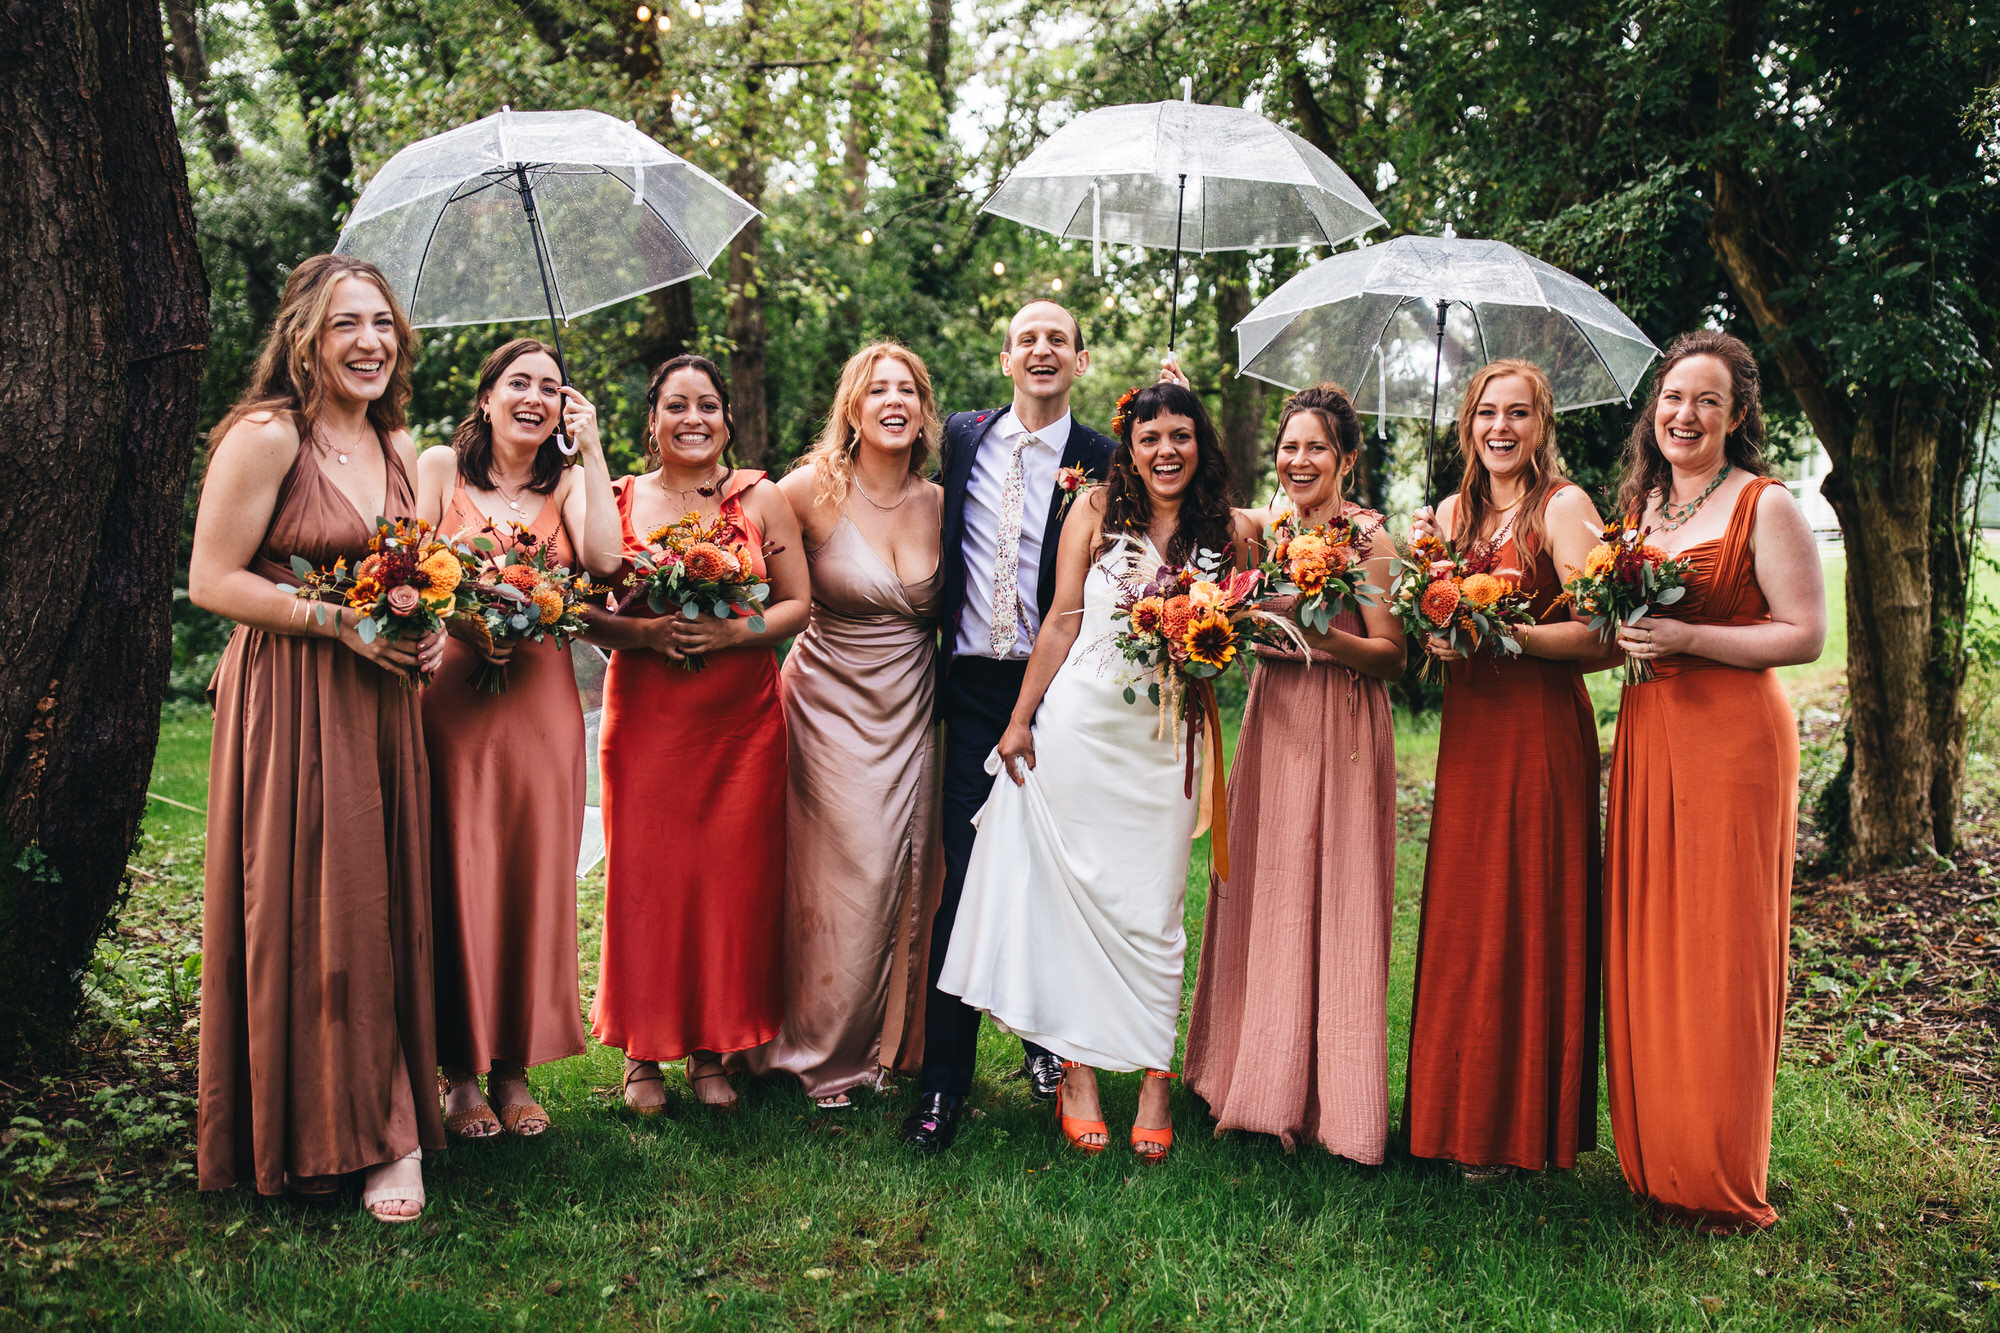 line up of bdie and groom with bridal party, bridesmaids holding up transparent umbrellas